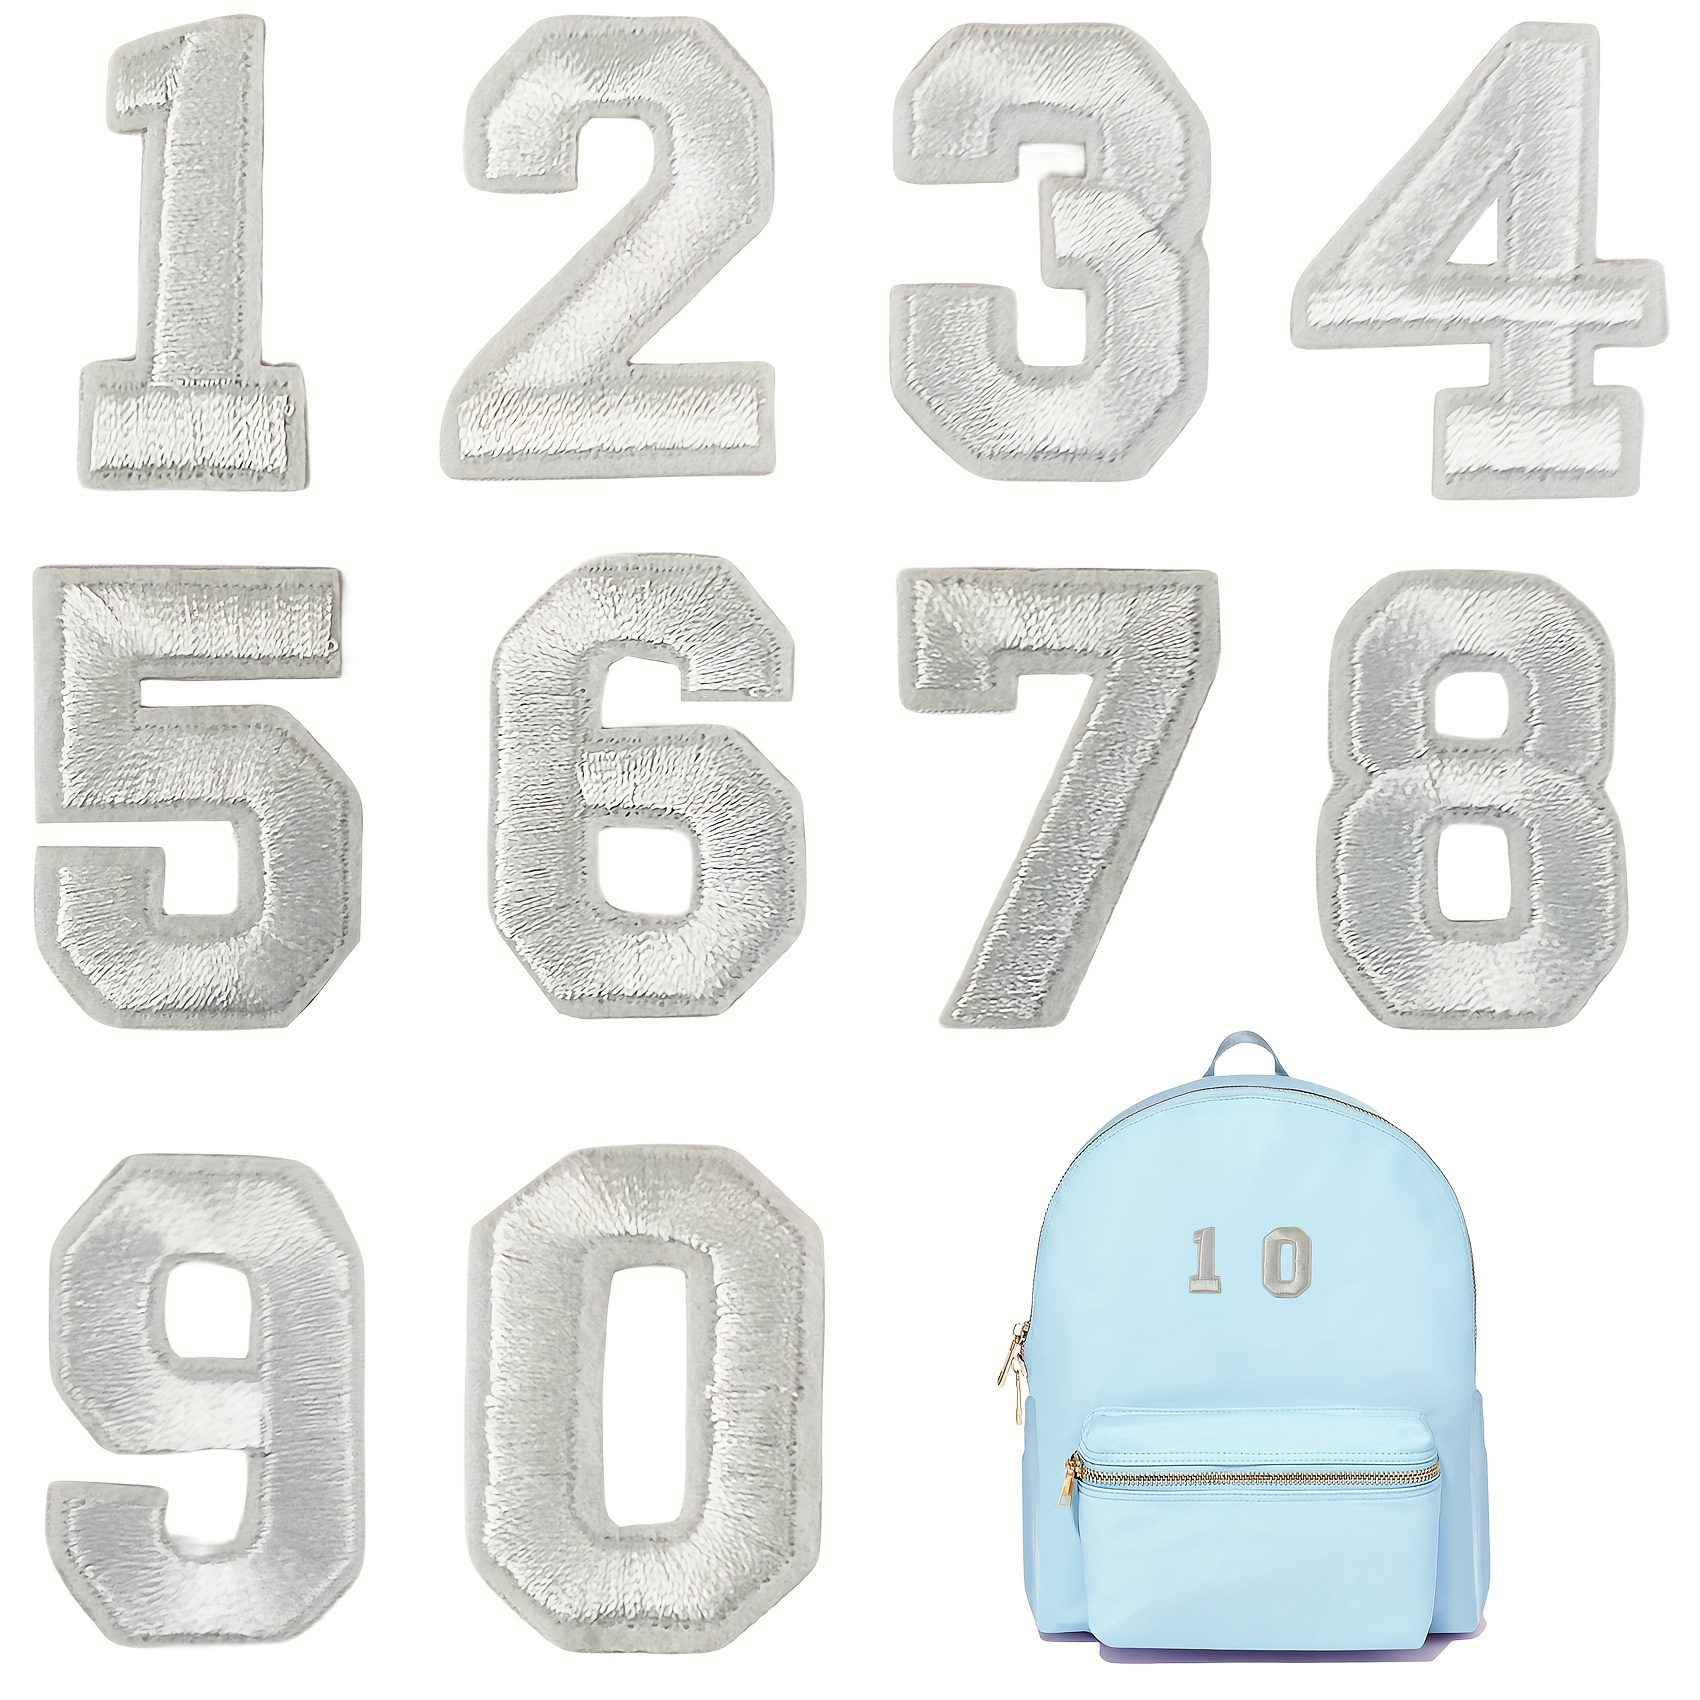 Gunky 20pcs Number Patches Baseball Patch 0-9 Self Adhesive Patches Embroidered Patches for DIY Preppy Patches on Hat Jackets Clothing Patches White